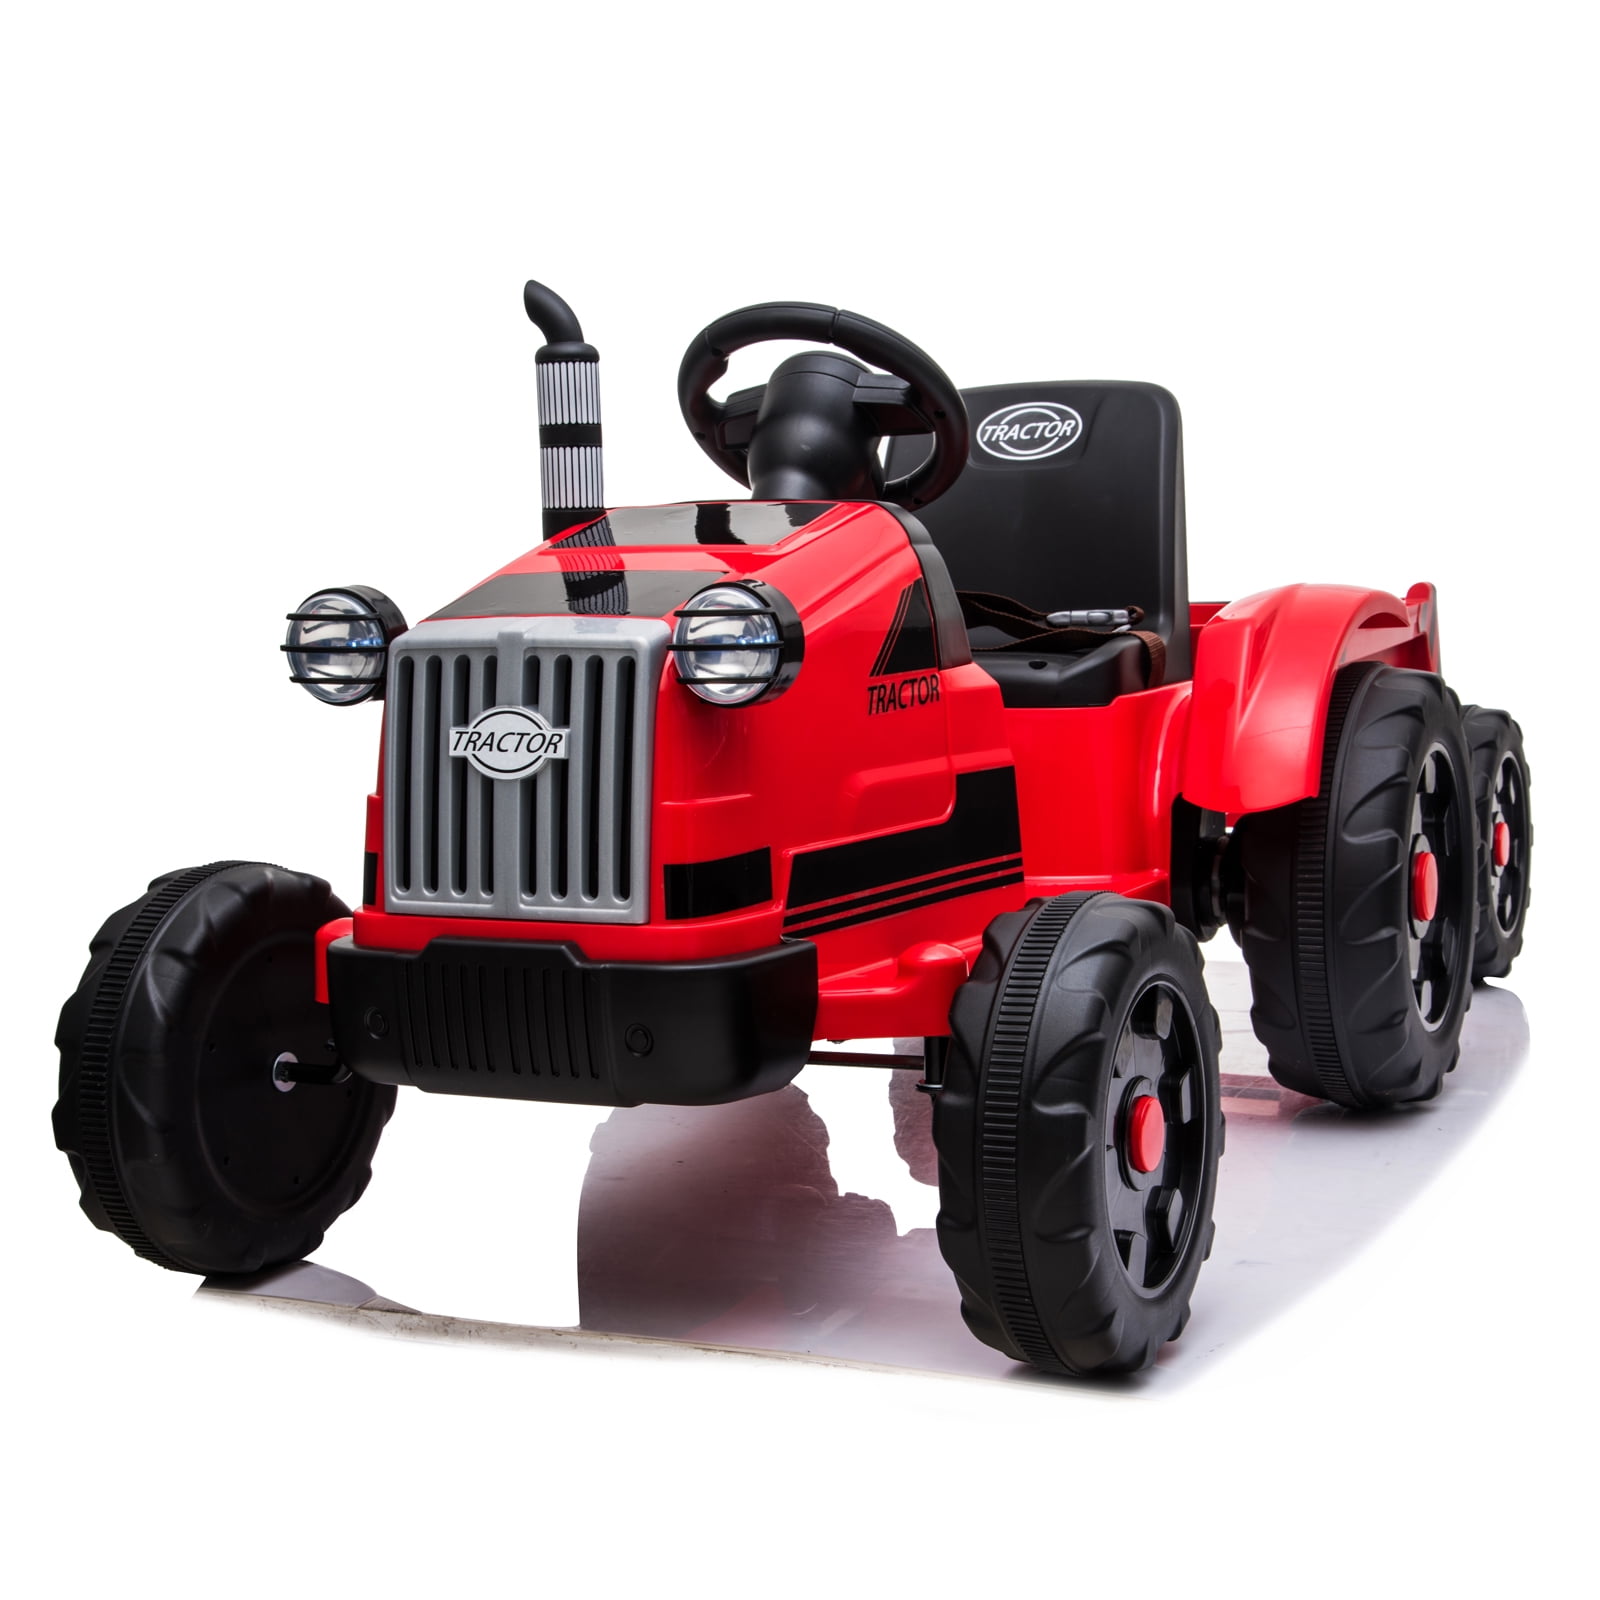 TOBBI 12V Kids Electric Battery-Powered Ride On Toy Tractor w/ Trailer Rose Red 